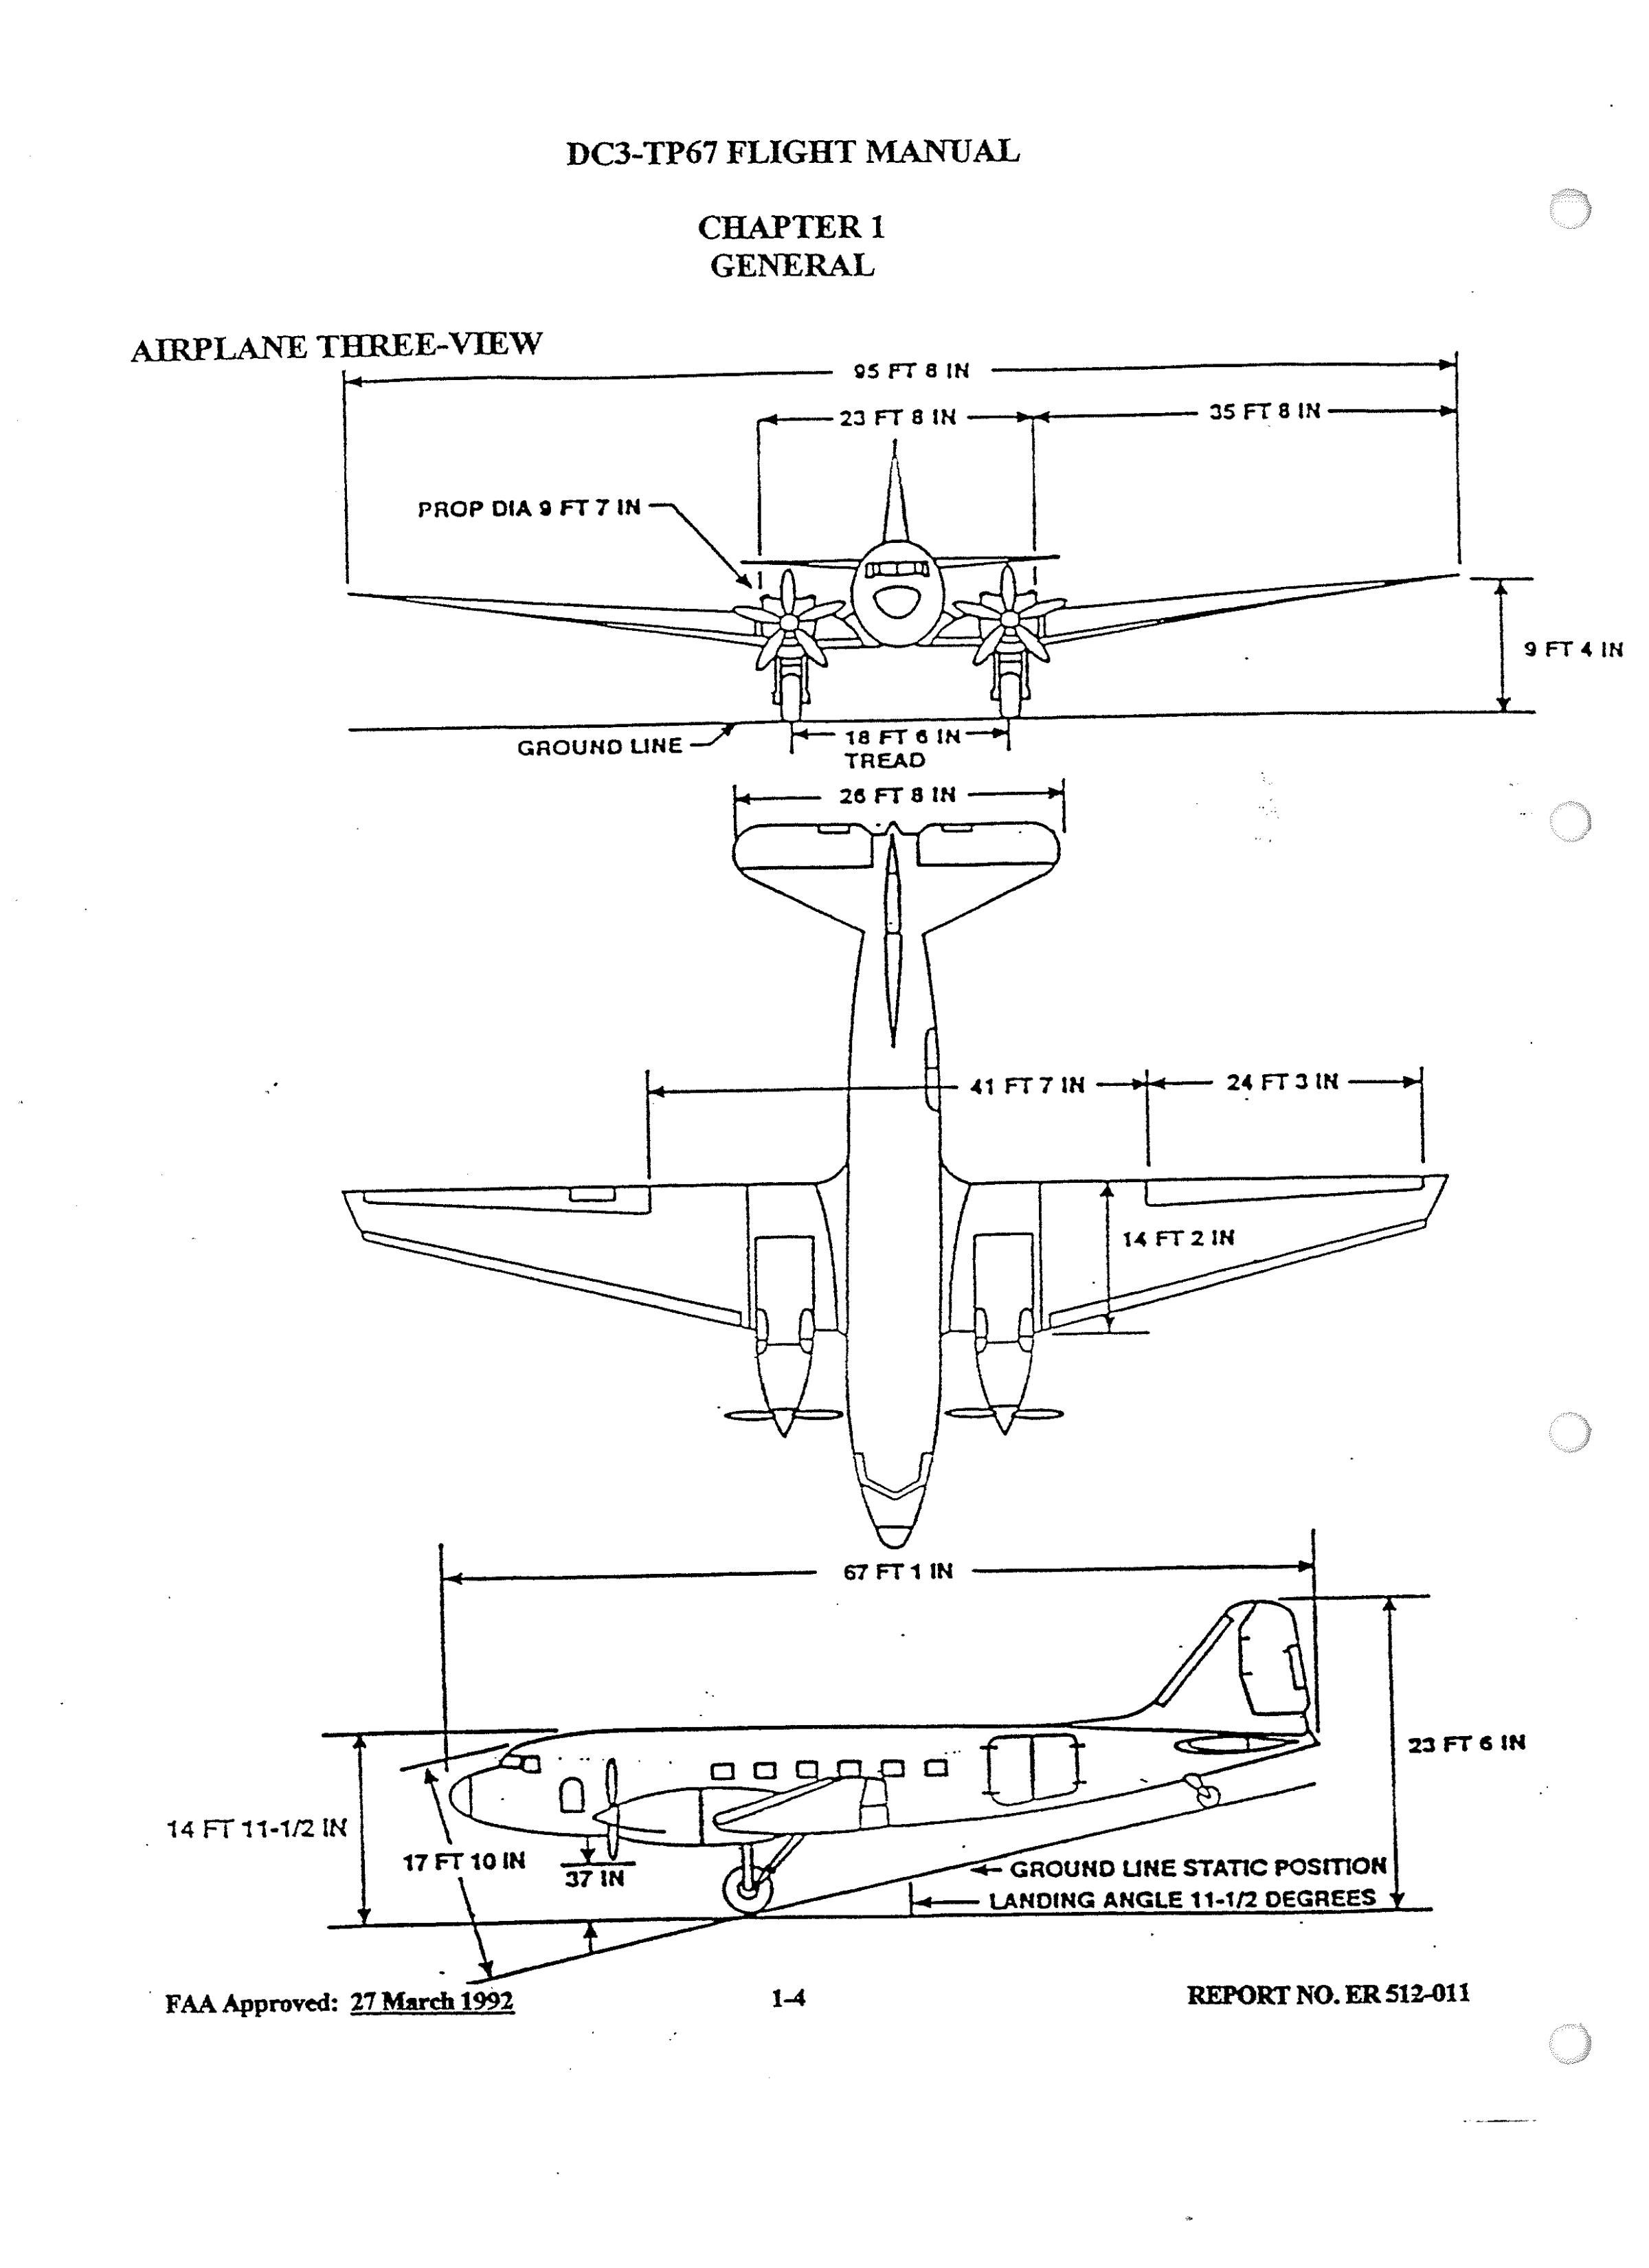 Sample page 12 from AirCorps Library document: Basler Turbo Conversions Flight Manual for Turbo DC3-TP67